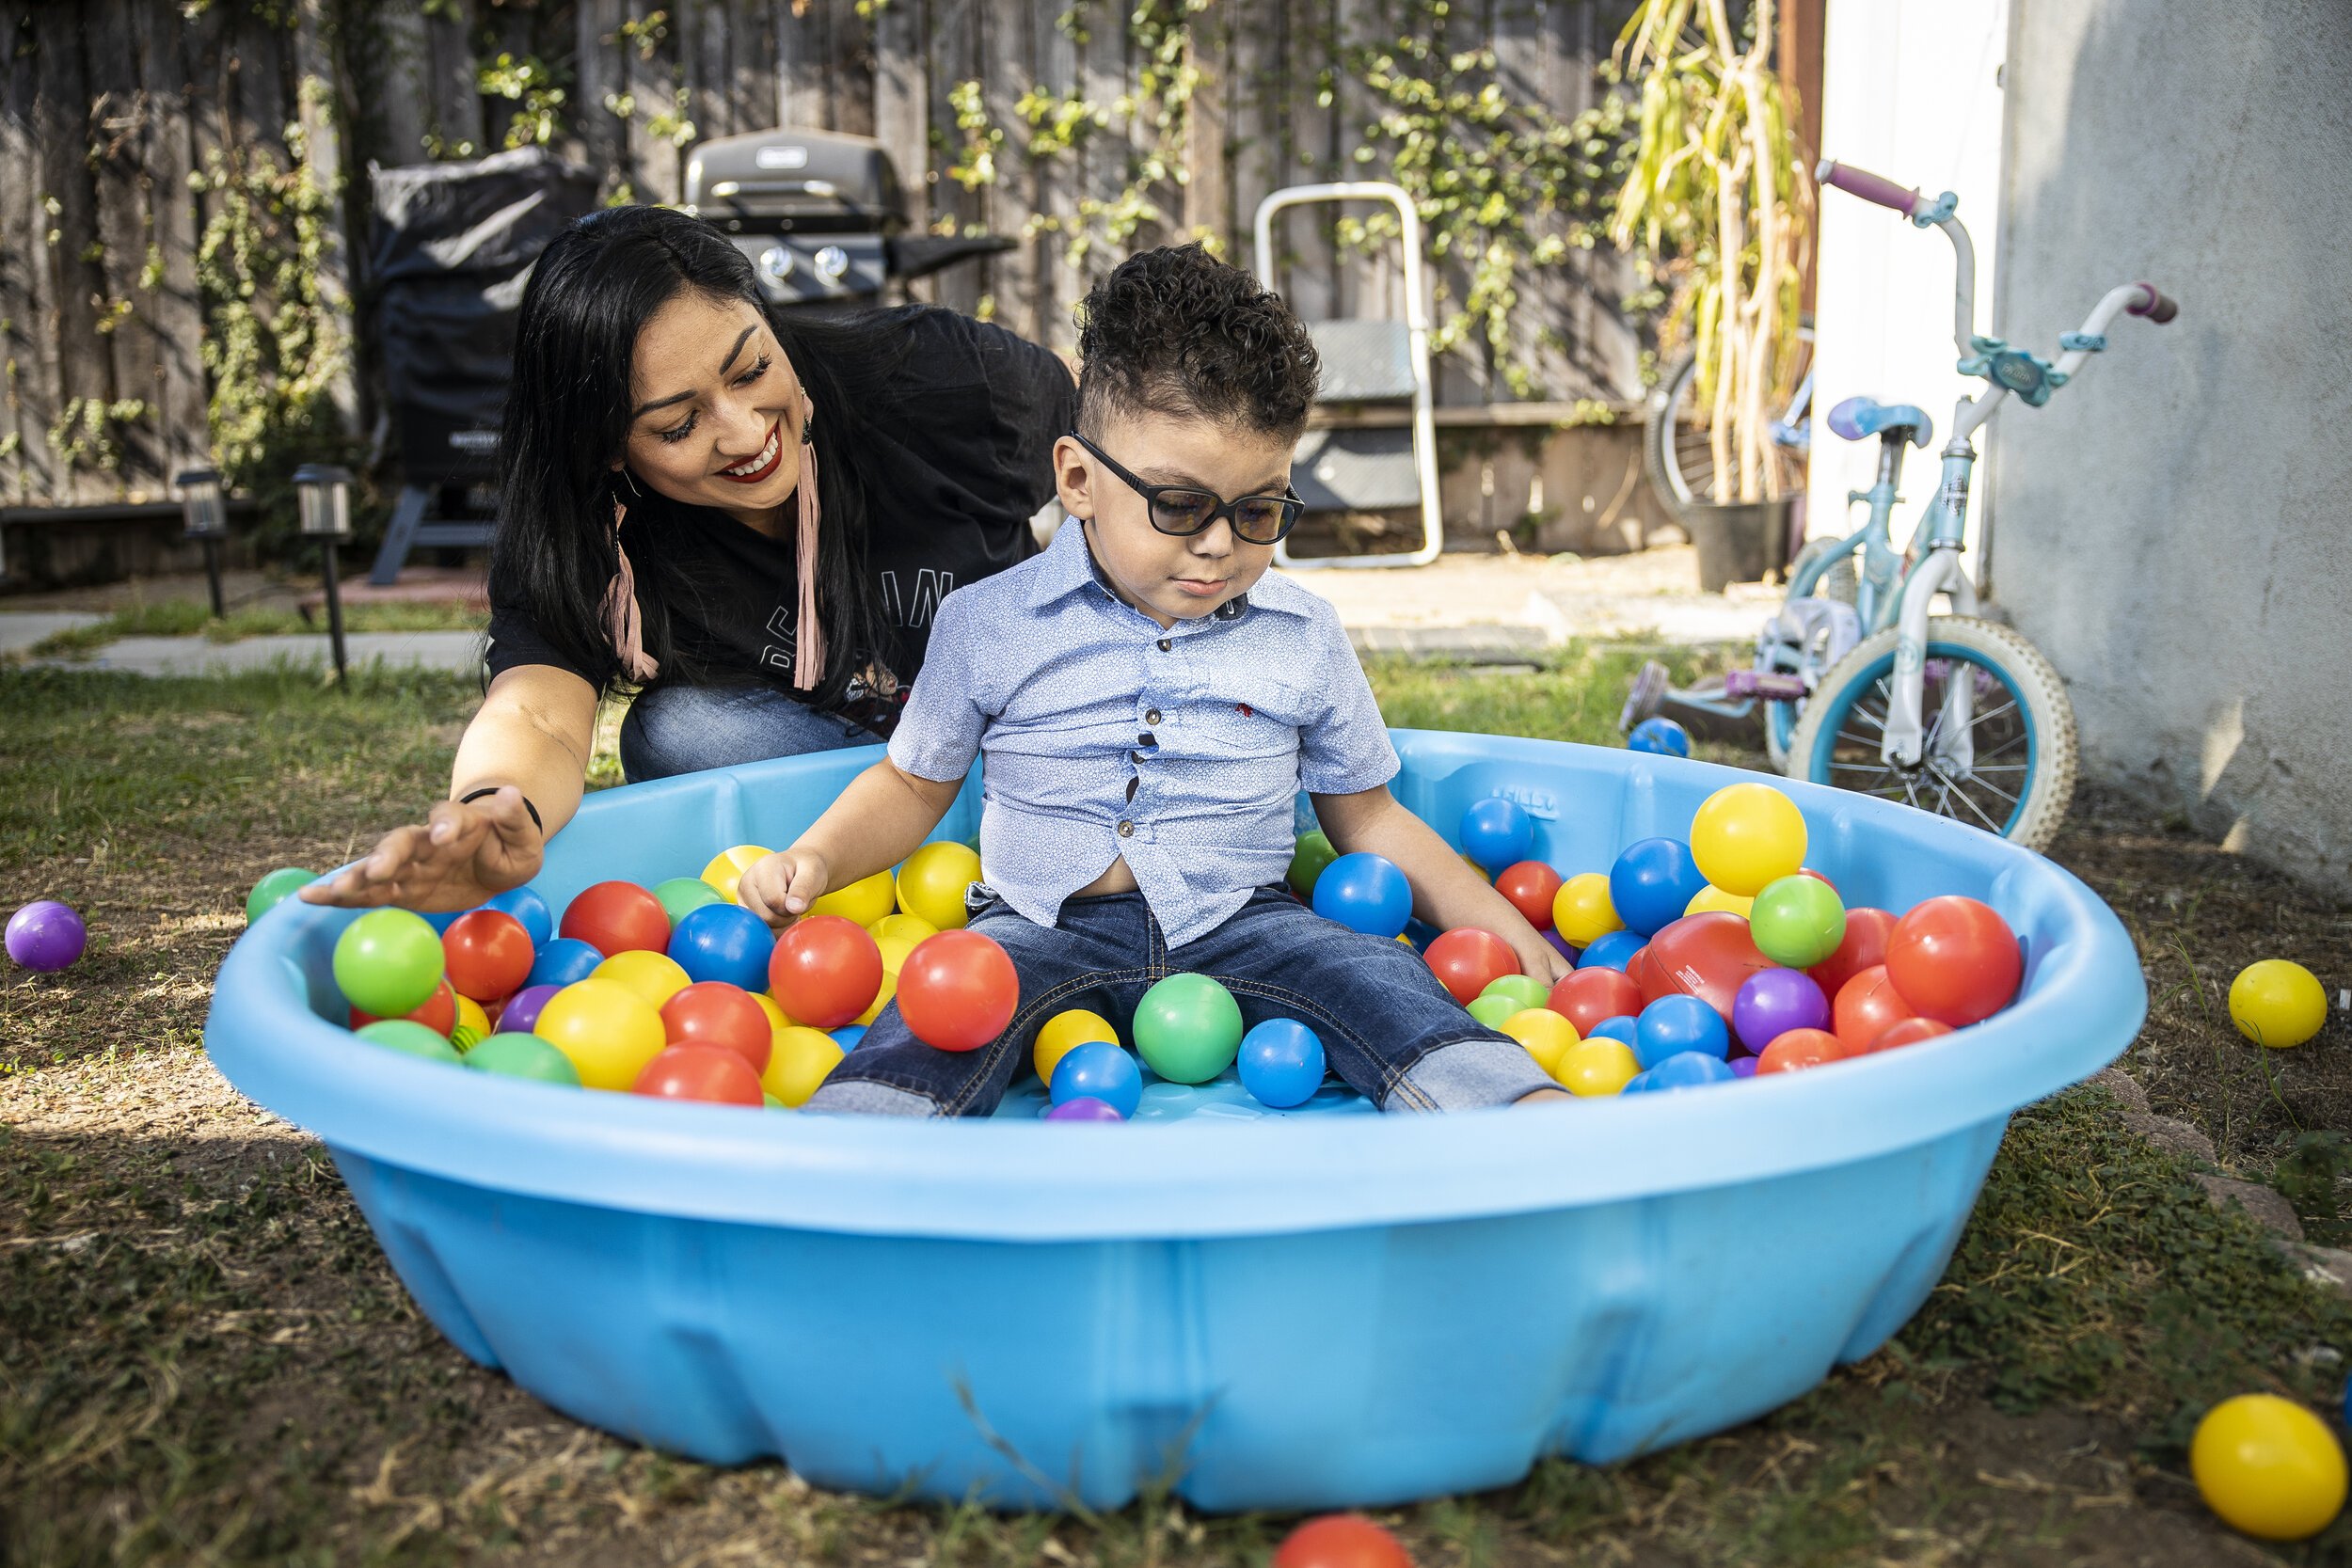  Melissa Alcala and her three-year-old son Gavin at their home in Alhambra, CA on Tuesday, August 25, 2020. Photo by Martin do Nascimento / Resolve Magazine 